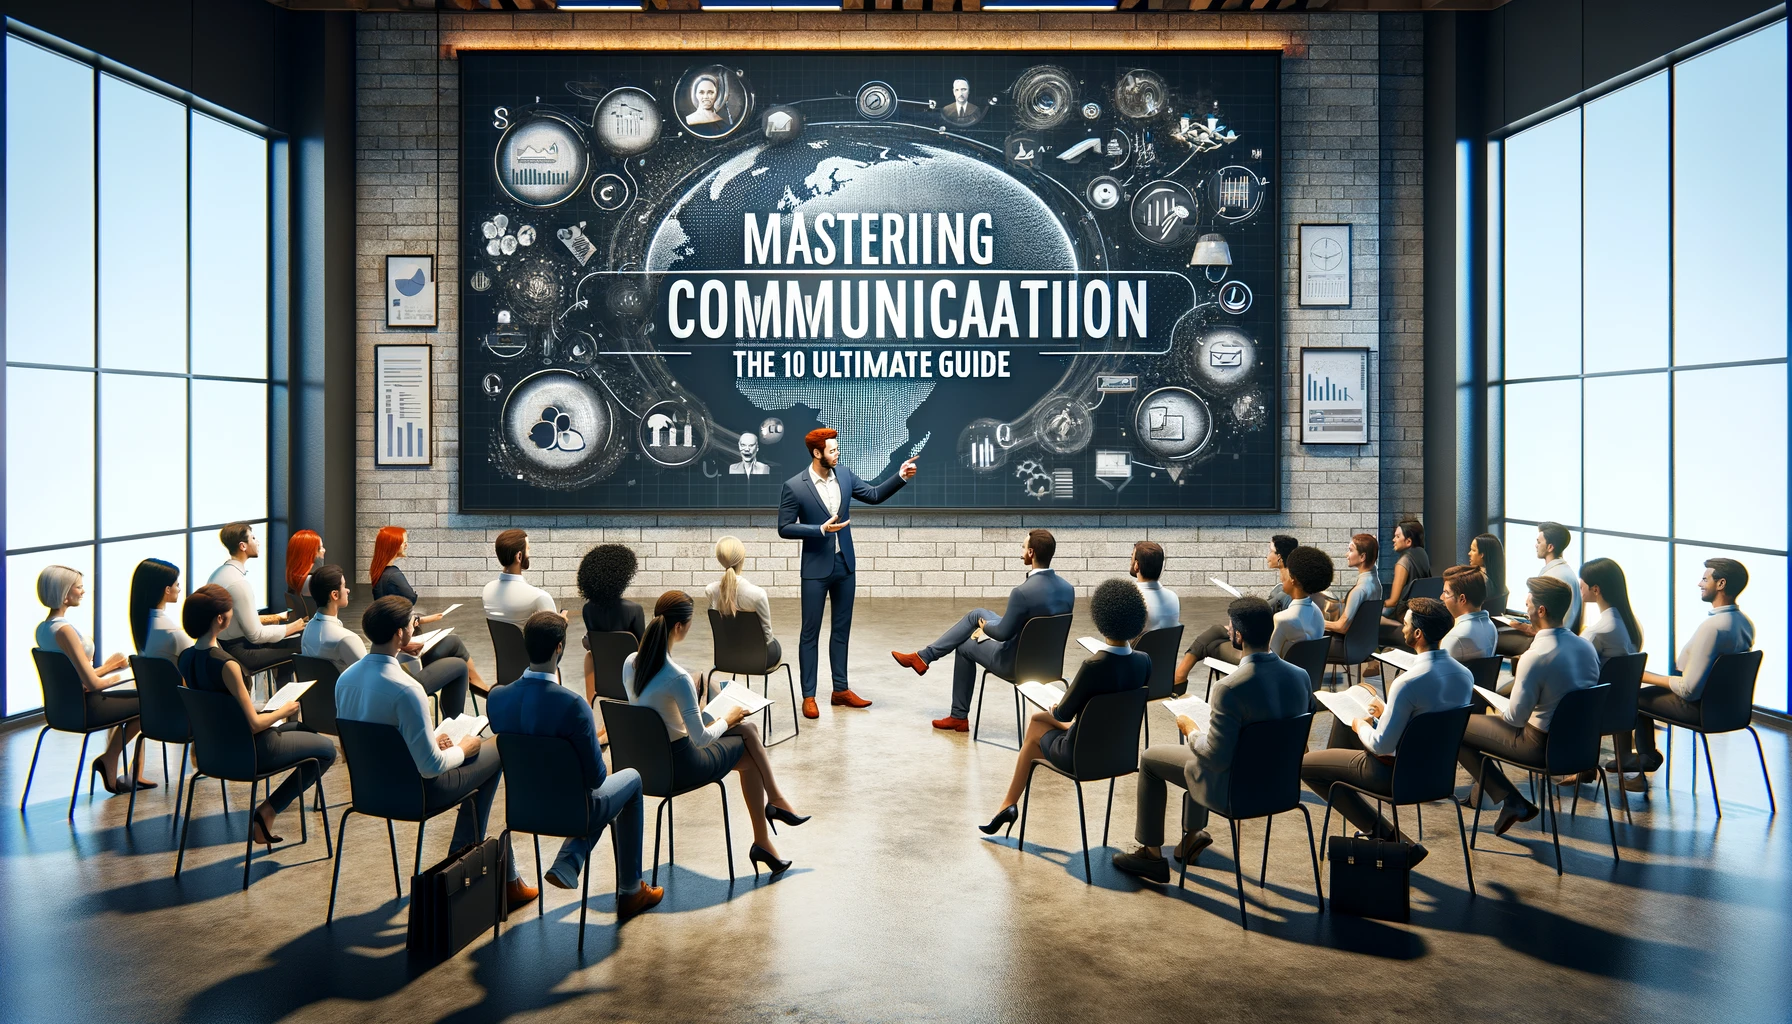 Mastering Communication: The 10 Ultimate Guide